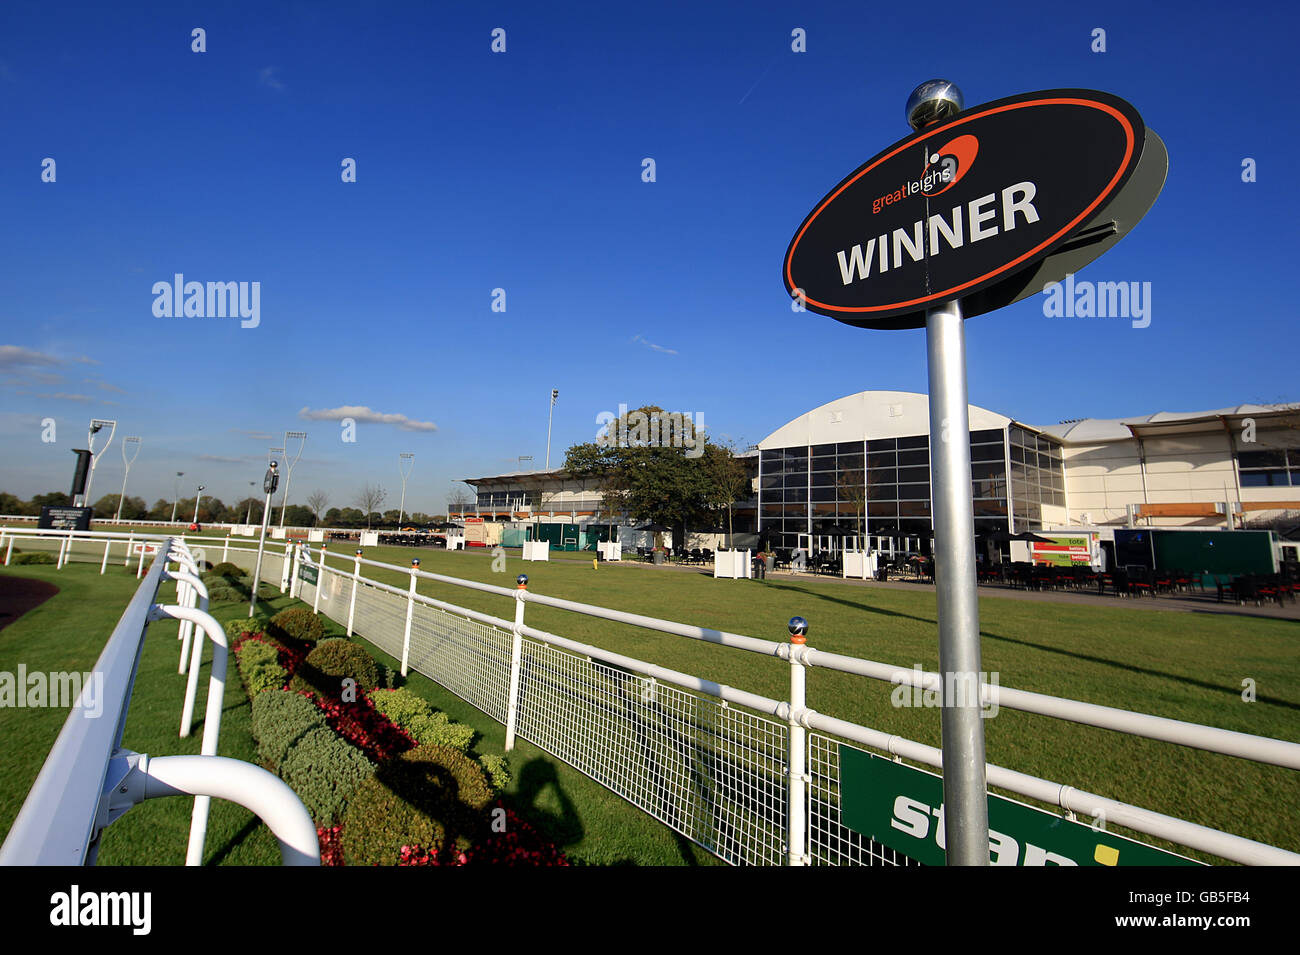 General view of the winners enclosure at Great Leighs Racecourse Stock Photo